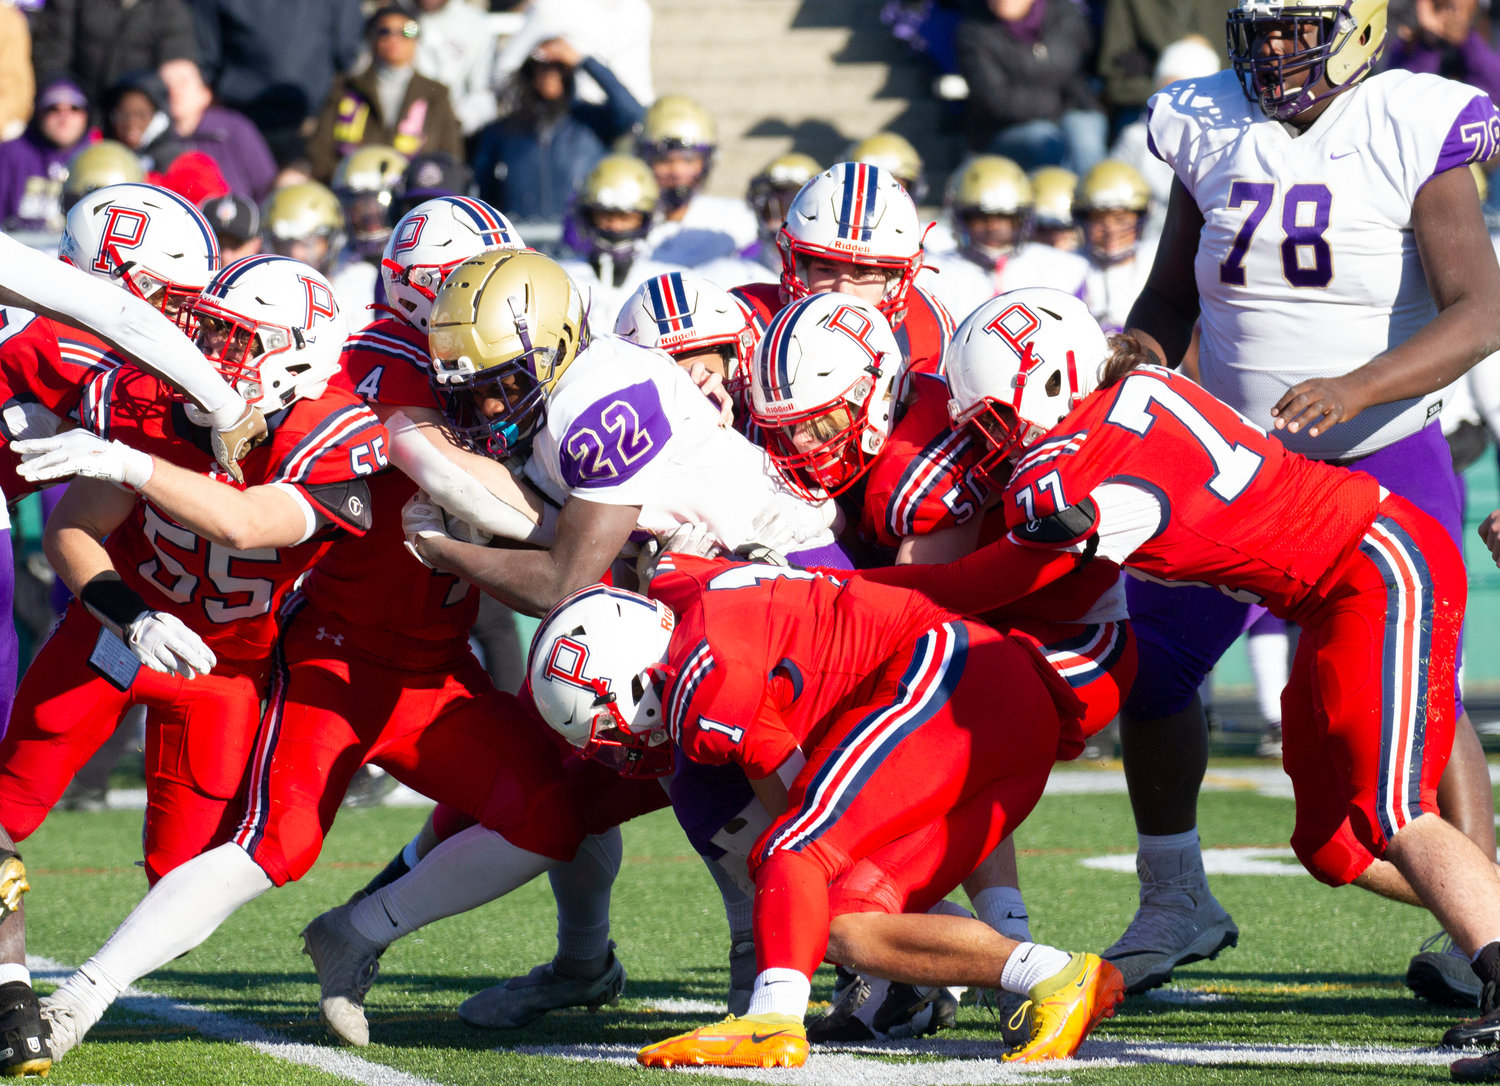 Neal Tullson, Carson Conheeny, Ben Blythe (from left) and others gang tackle Aaron Julius in the fourth quarter.